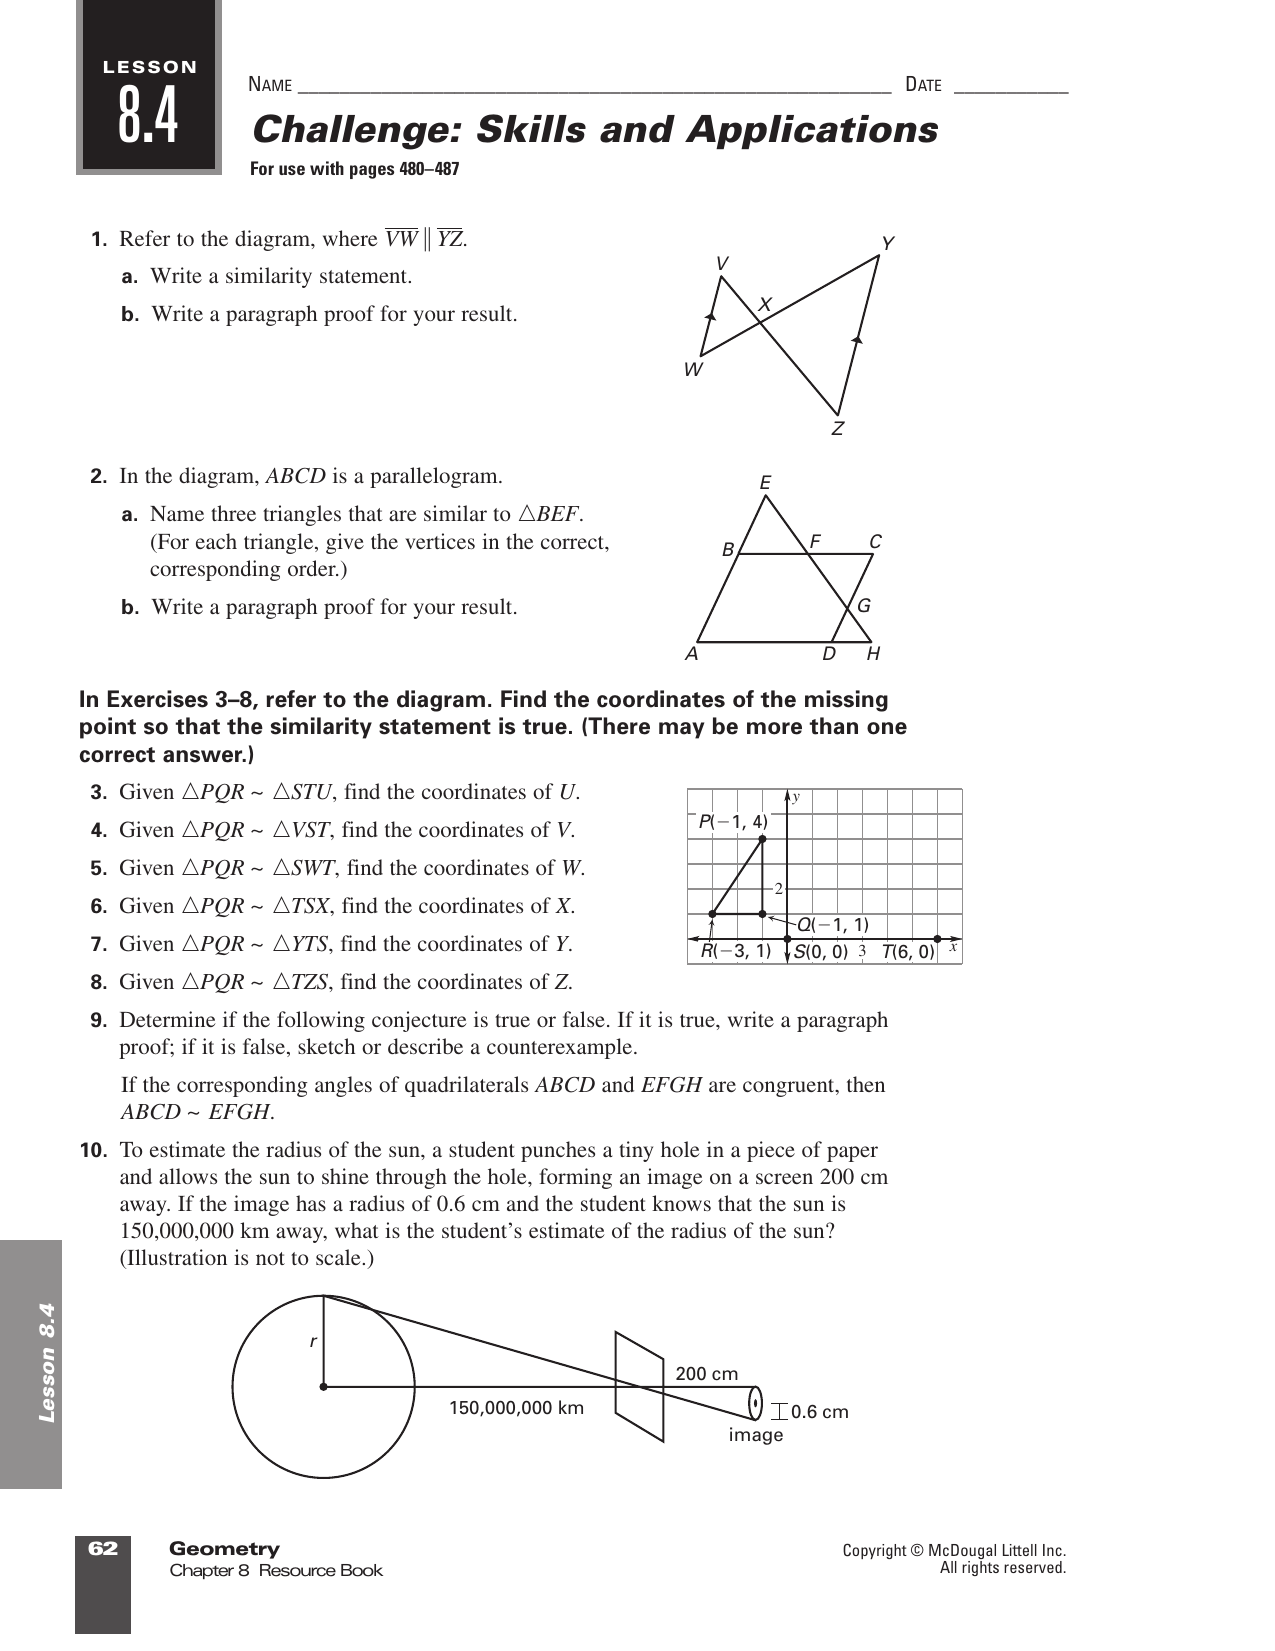 Mcdougal littell geometry chapter 9 resource book answer ...